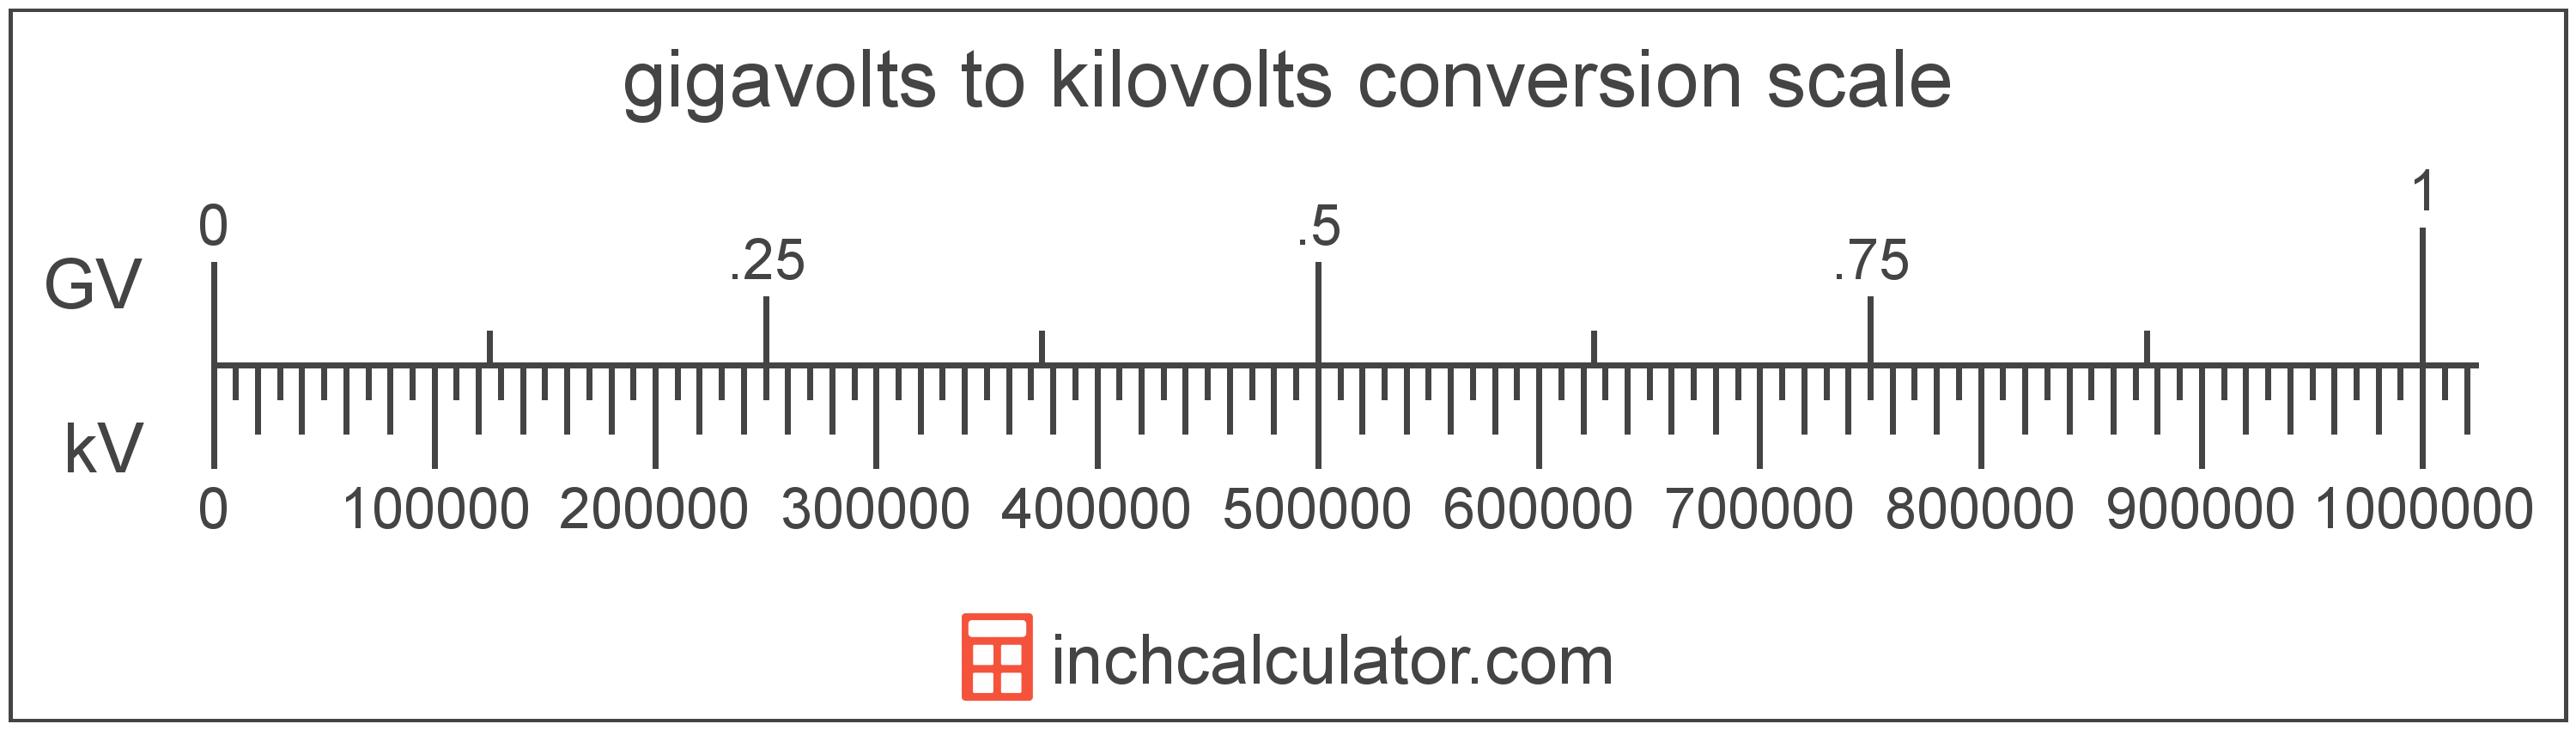 conversion scale showing gigavolts and equivalent kilovolts voltage values